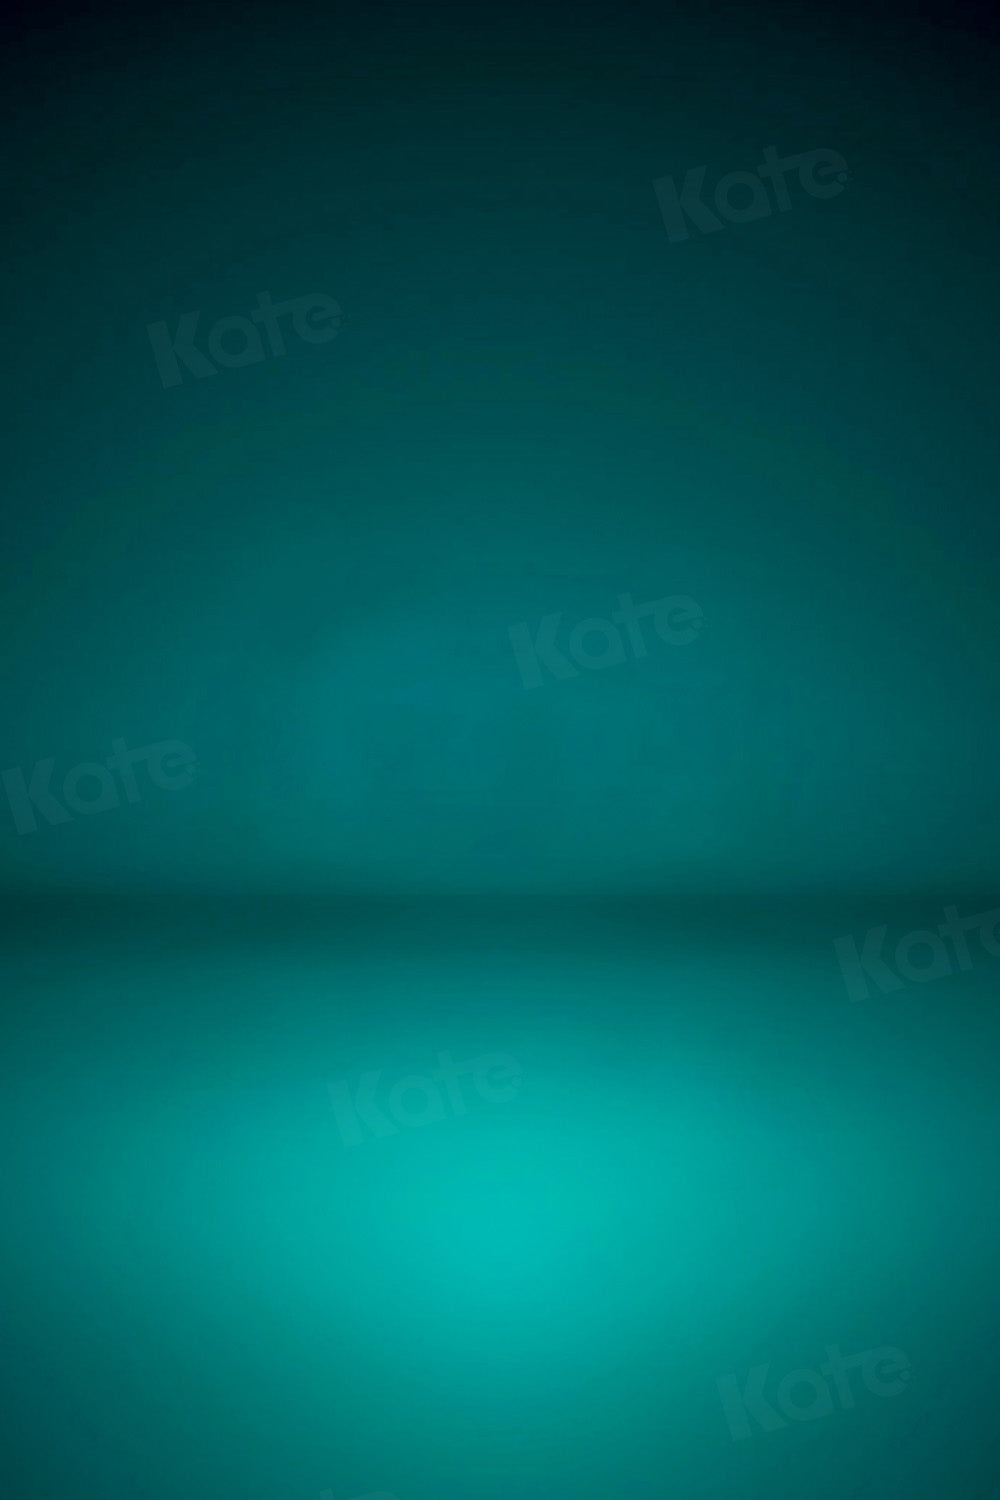 Kate Abstract Green Backdrop Fine Art Designed by Kate Image